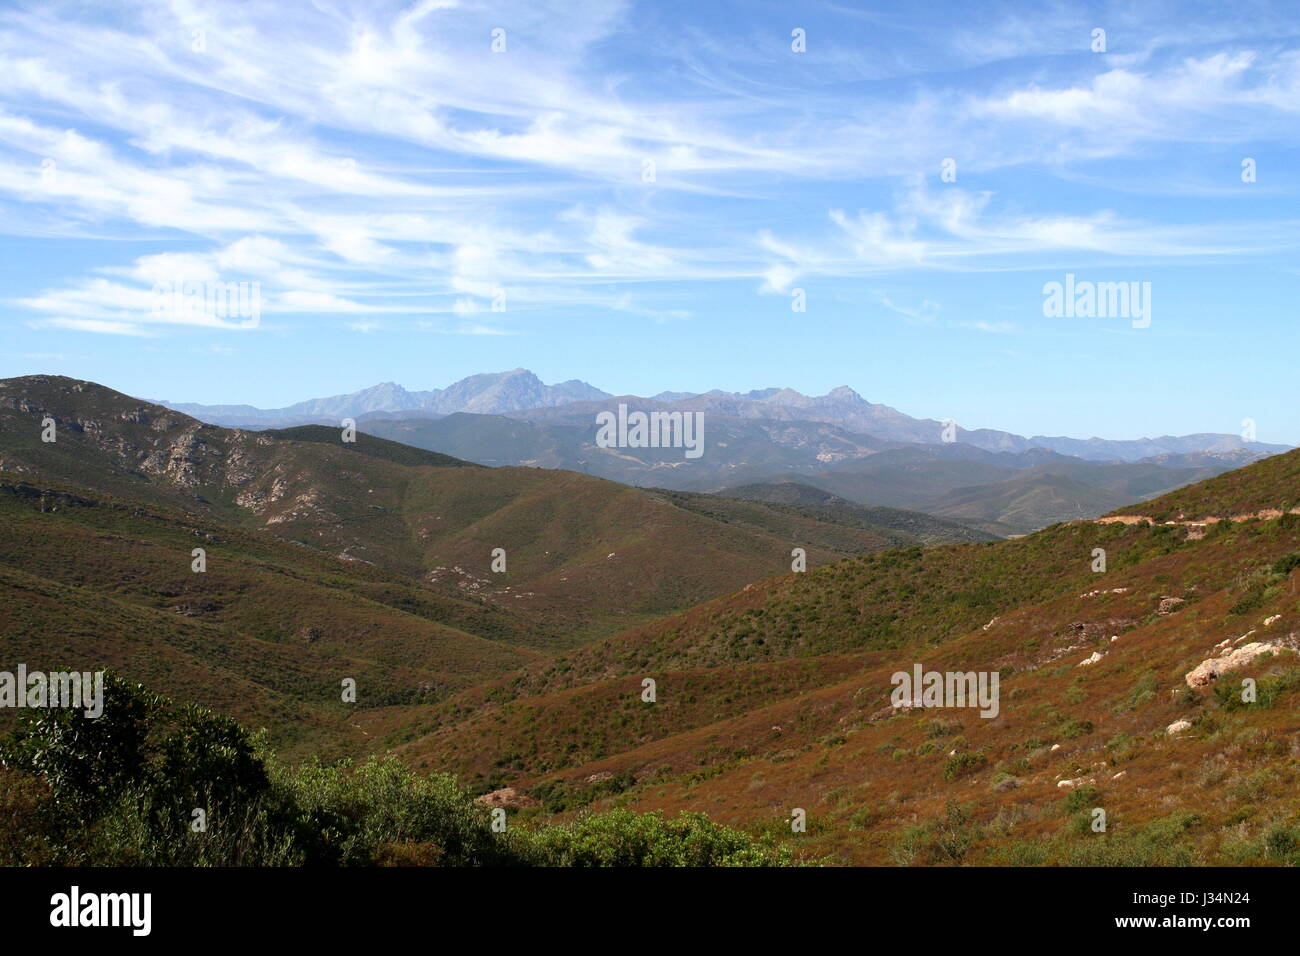 Corsica Interior. View looking to Monte Padru in the islands highland interior seen from the Desert des Agriates in the north of Corsica. Stock Photo